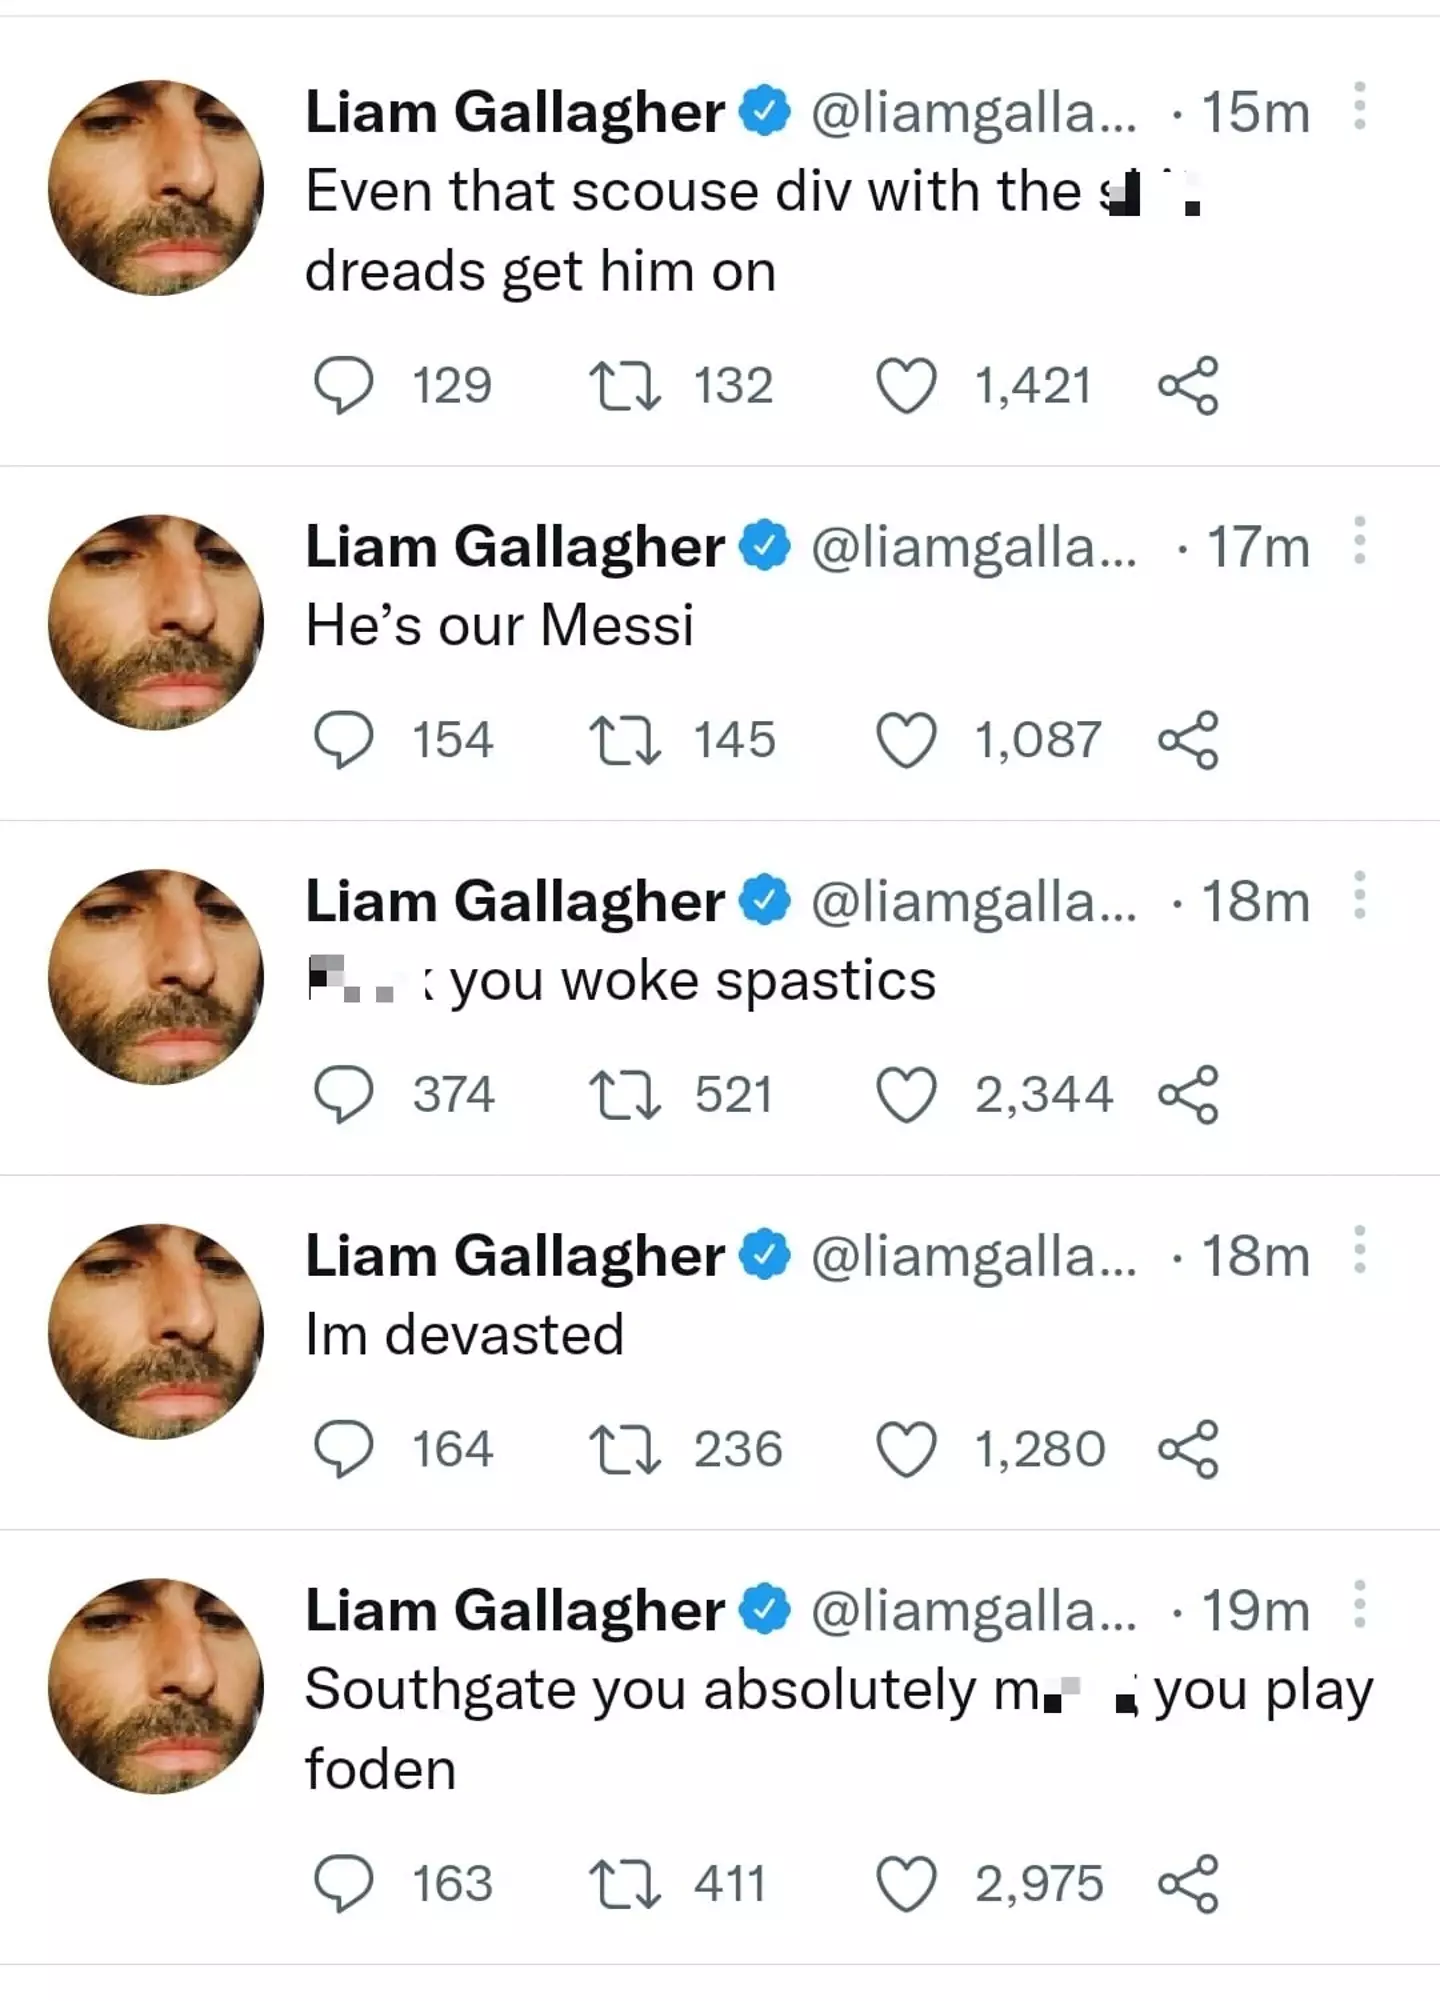 Liam Gallagher tweeted then deleted two ableist slurs.